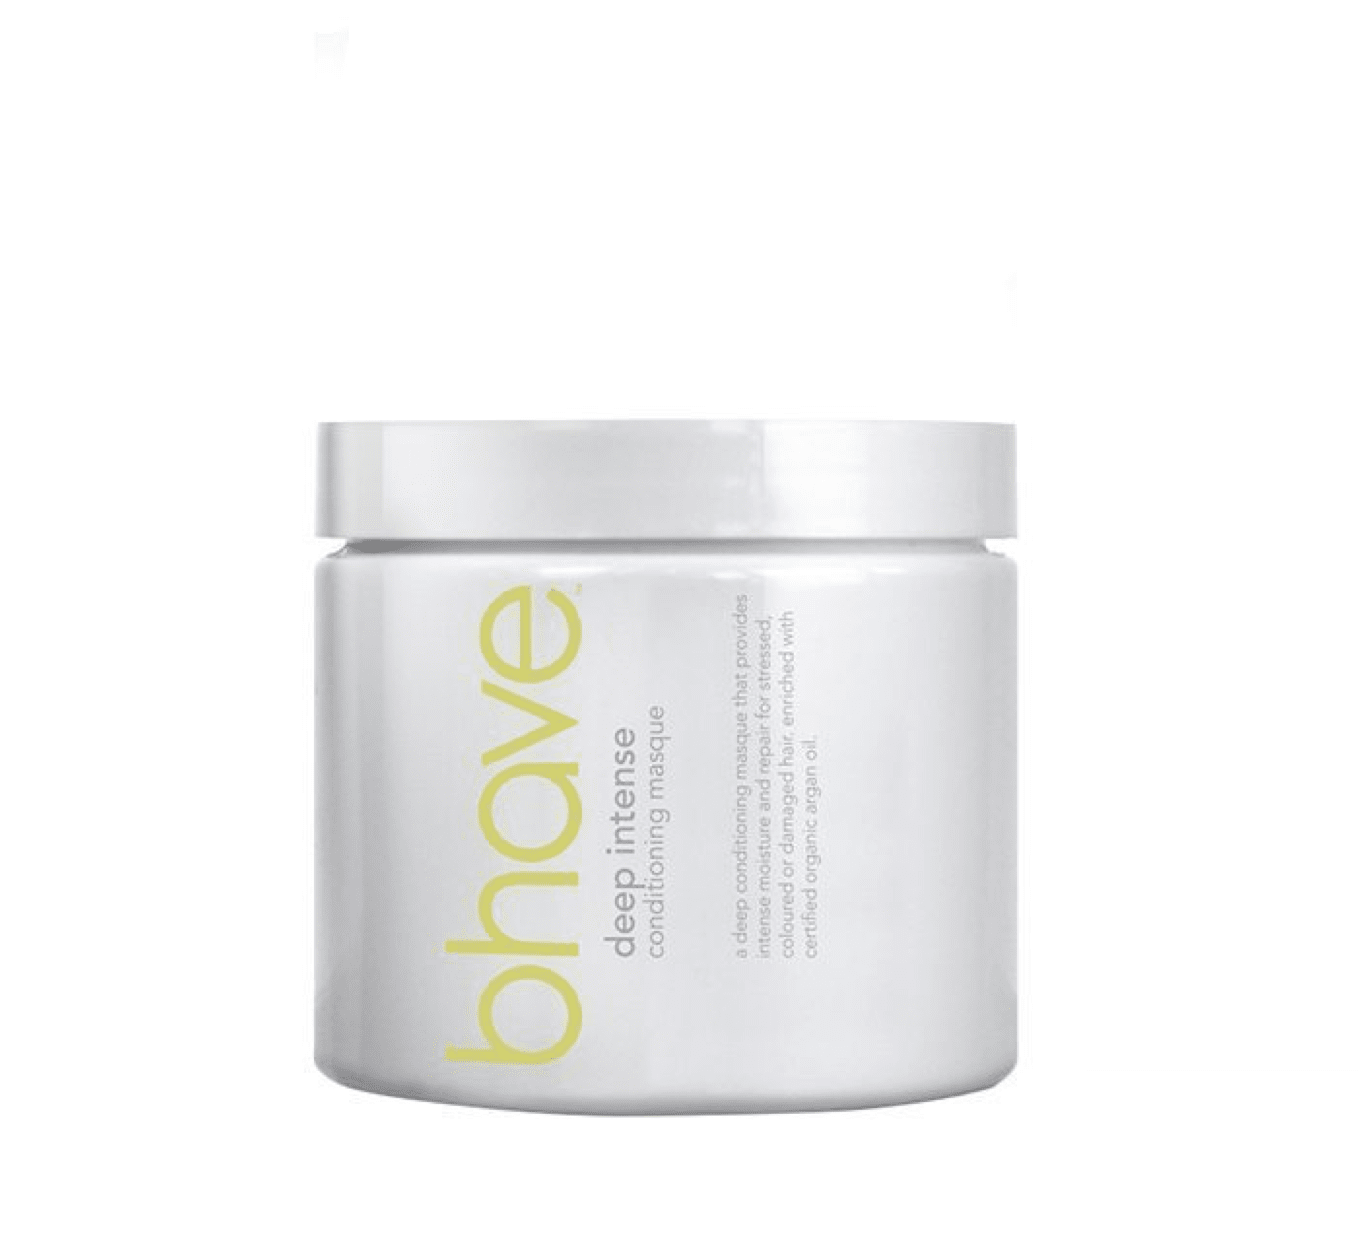 Bhave Intense Conditioning Masque 400g